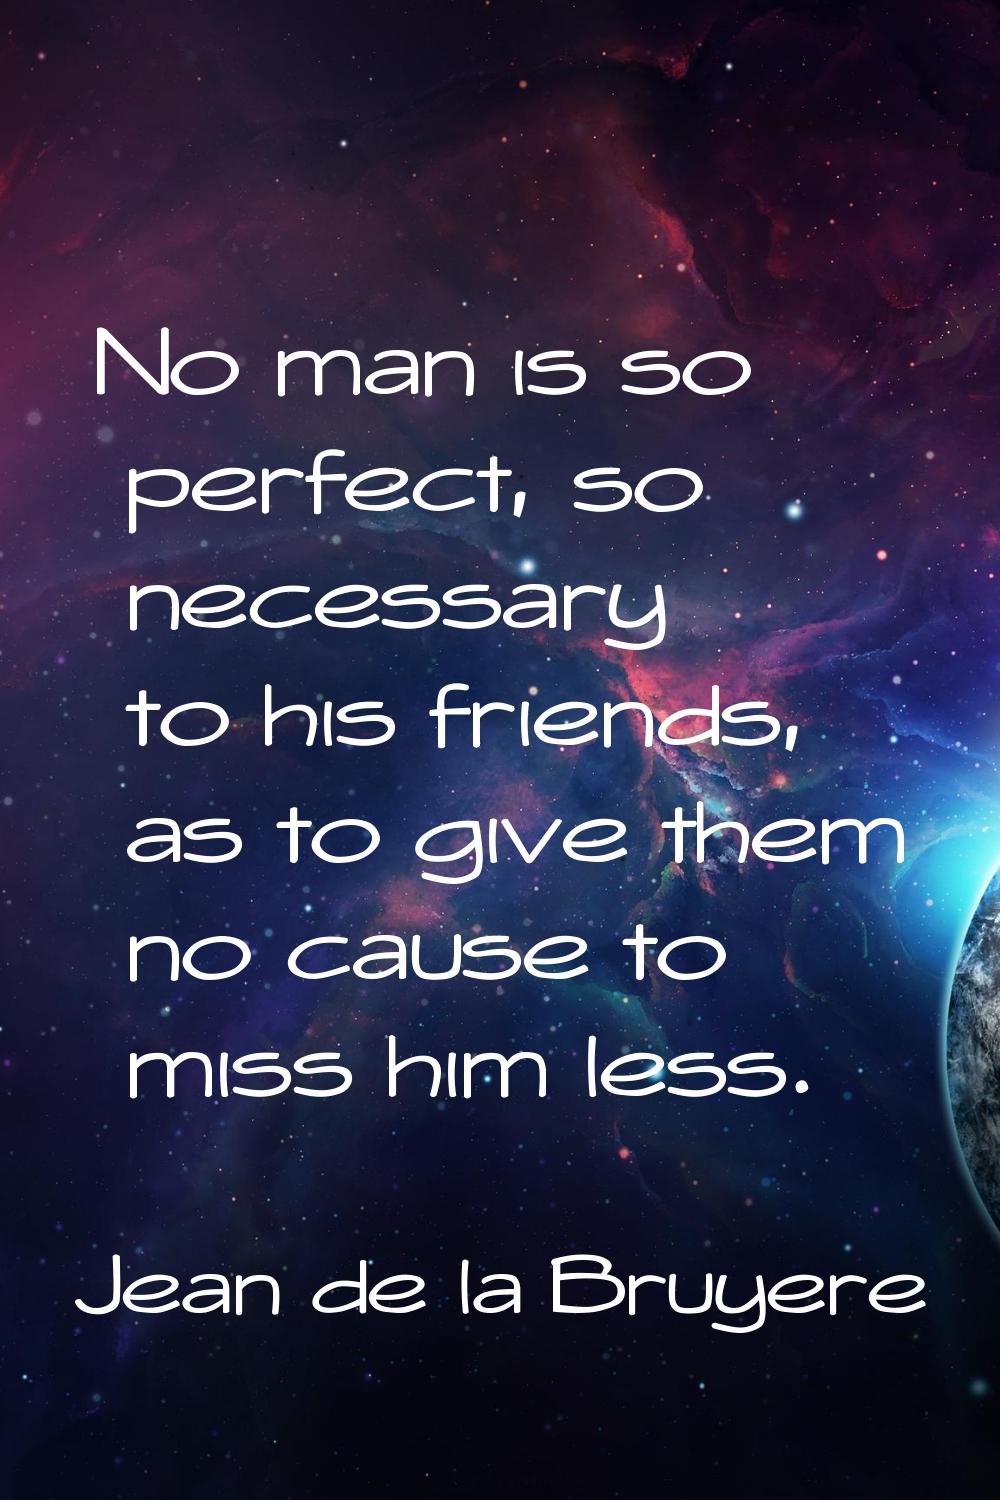 No man is so perfect, so necessary to his friends, as to give them no cause to miss him less.